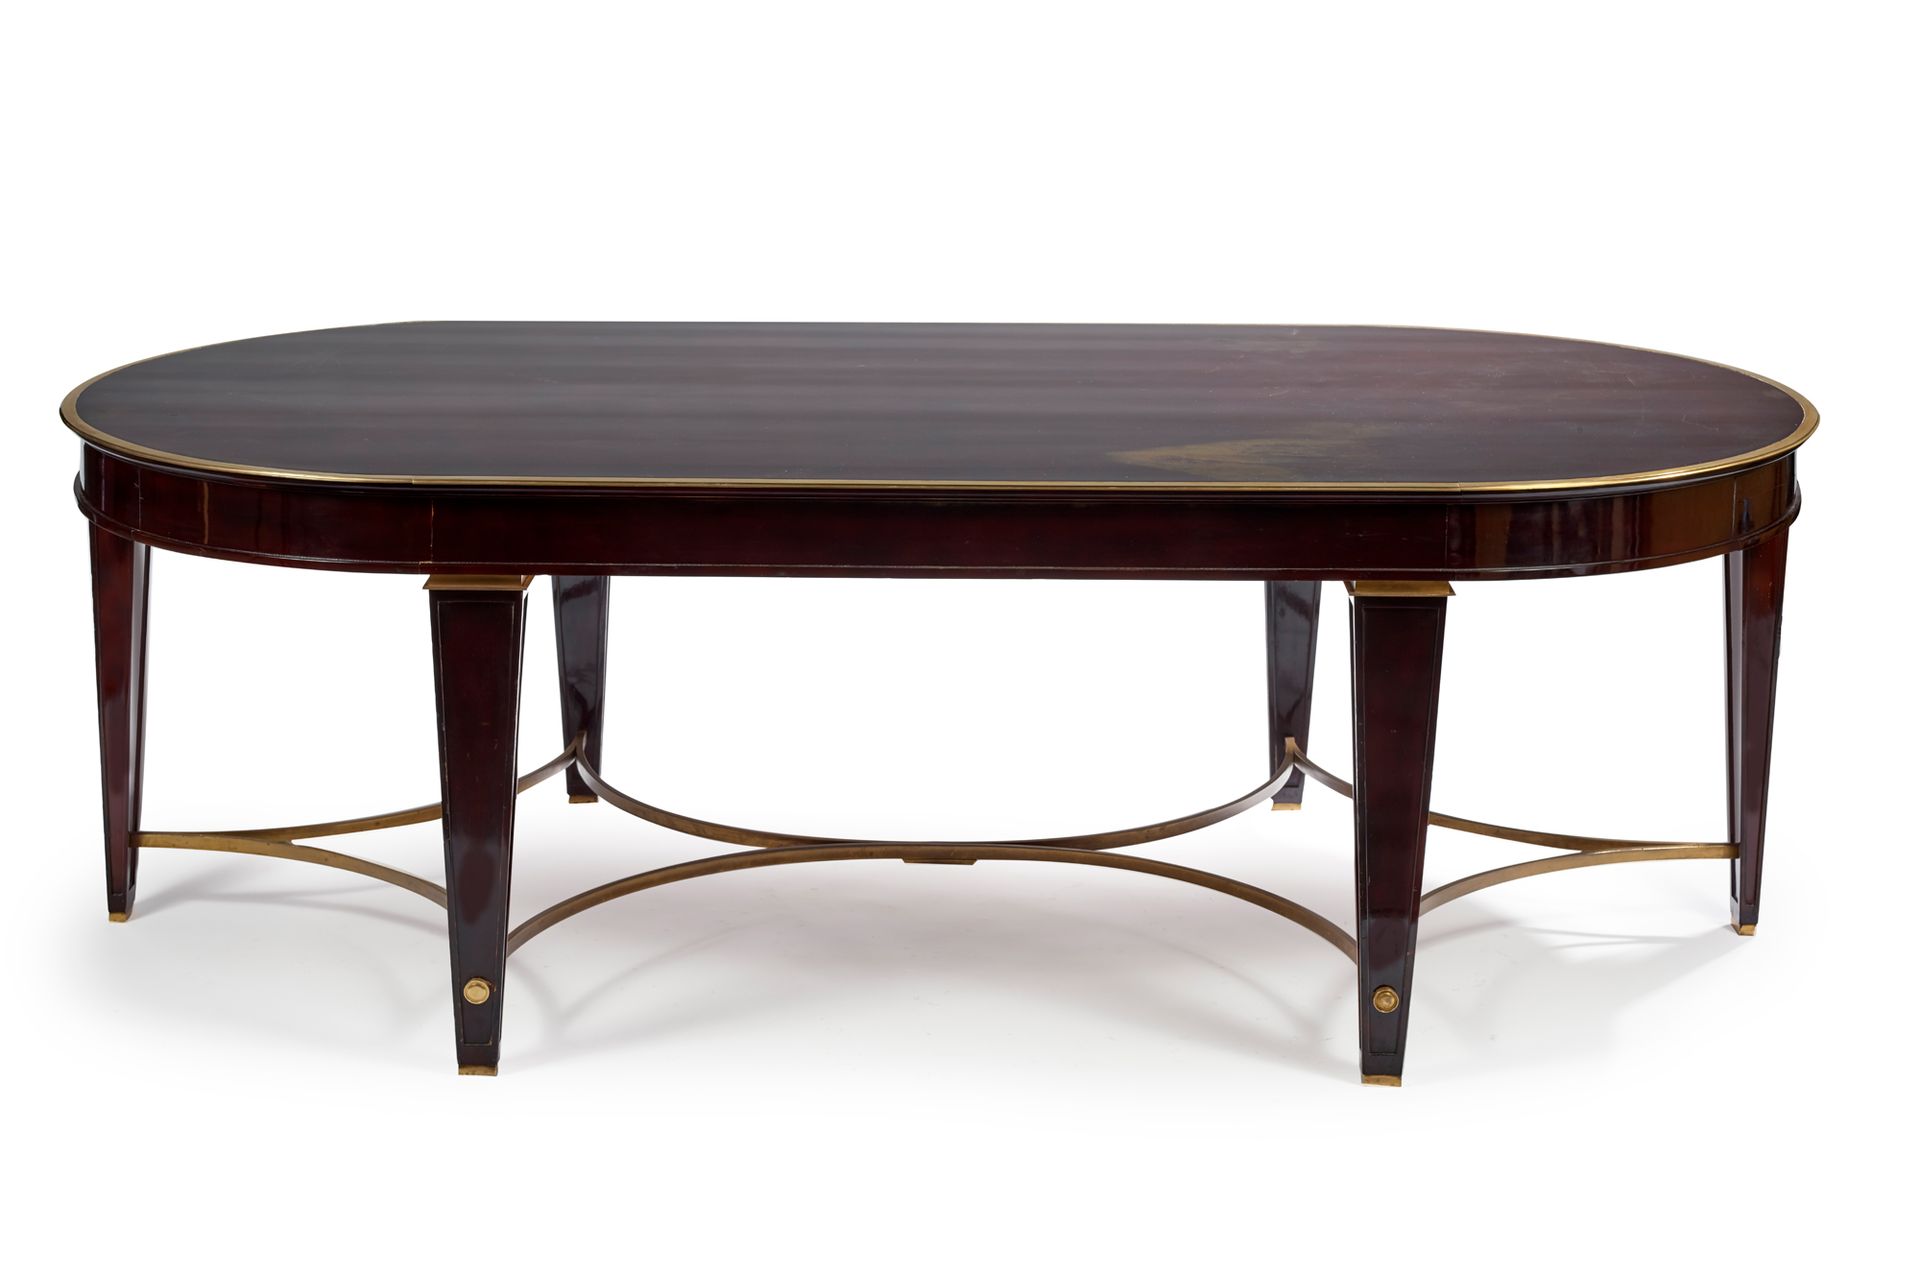 Jean Maurice ROTHSCHILD (1902-1998) 
Oval top dining table in shaded brown lacqu&hellip;